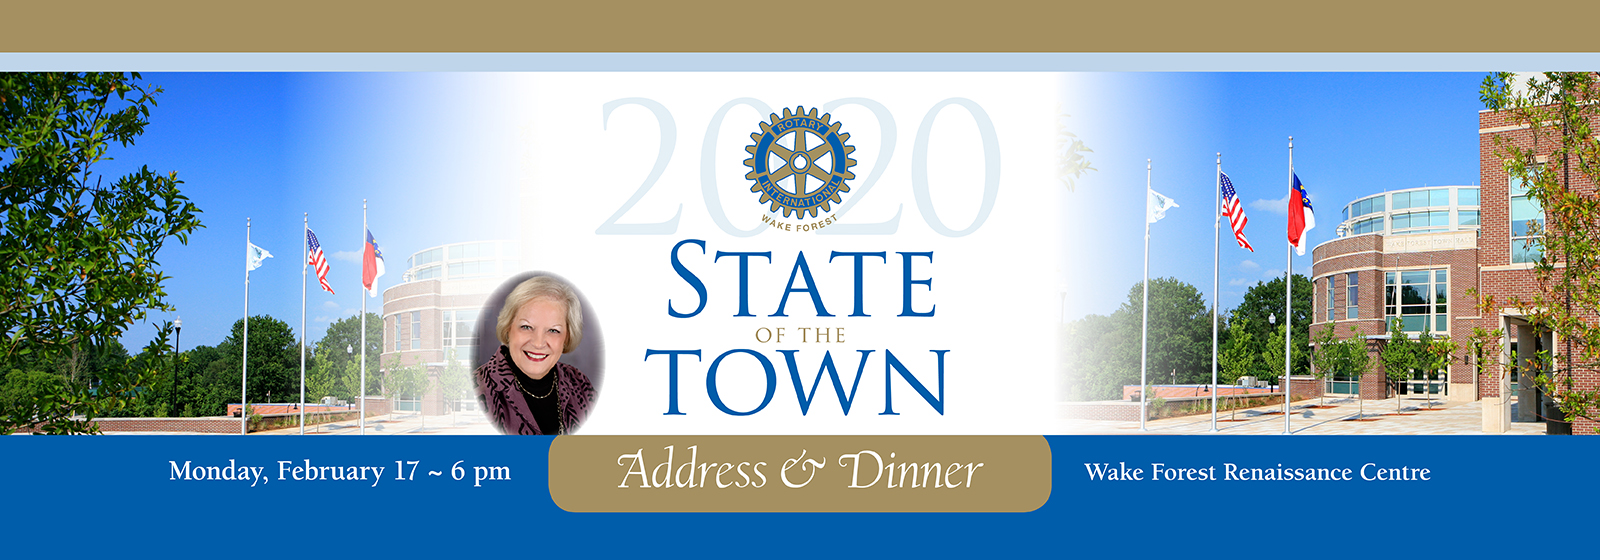 State of the Town Dinner and Address